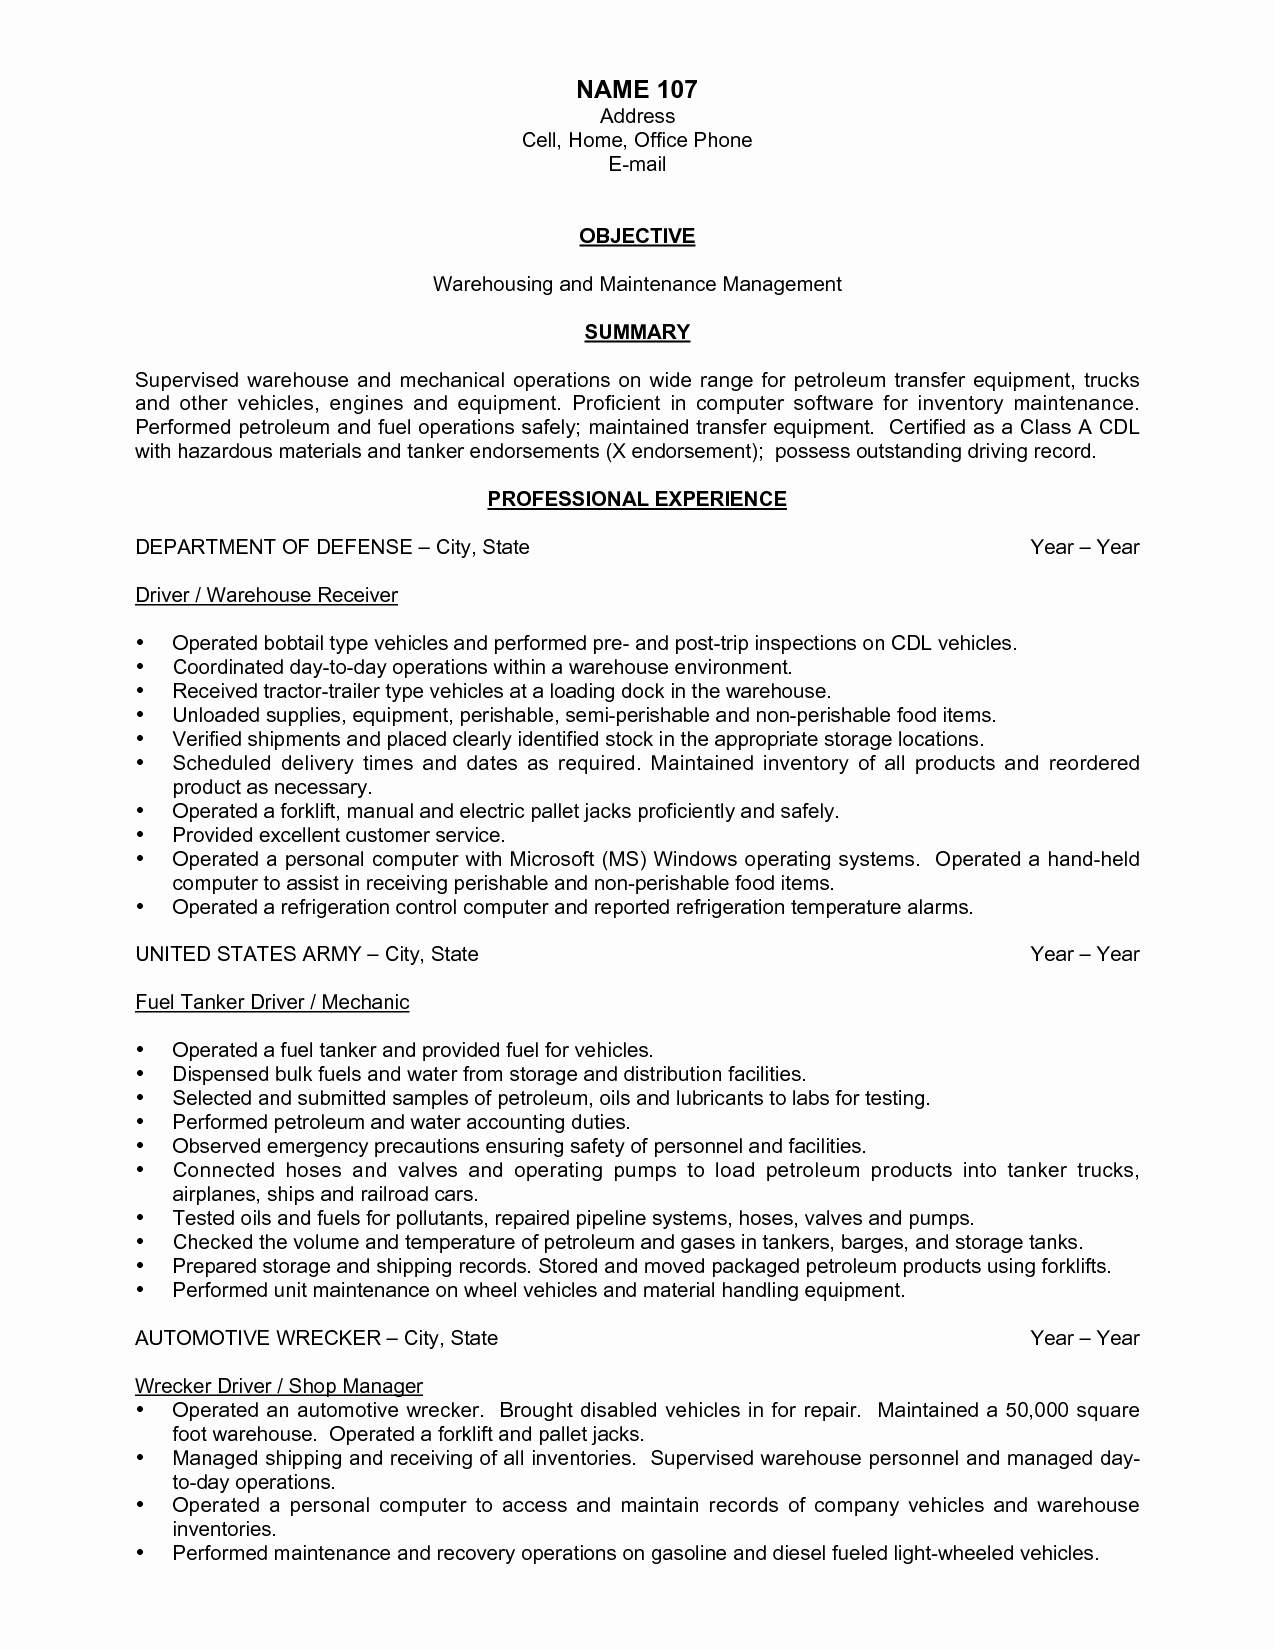 Resume for A Warehouse Job Awesome General Warehouse Worker Resume Sample